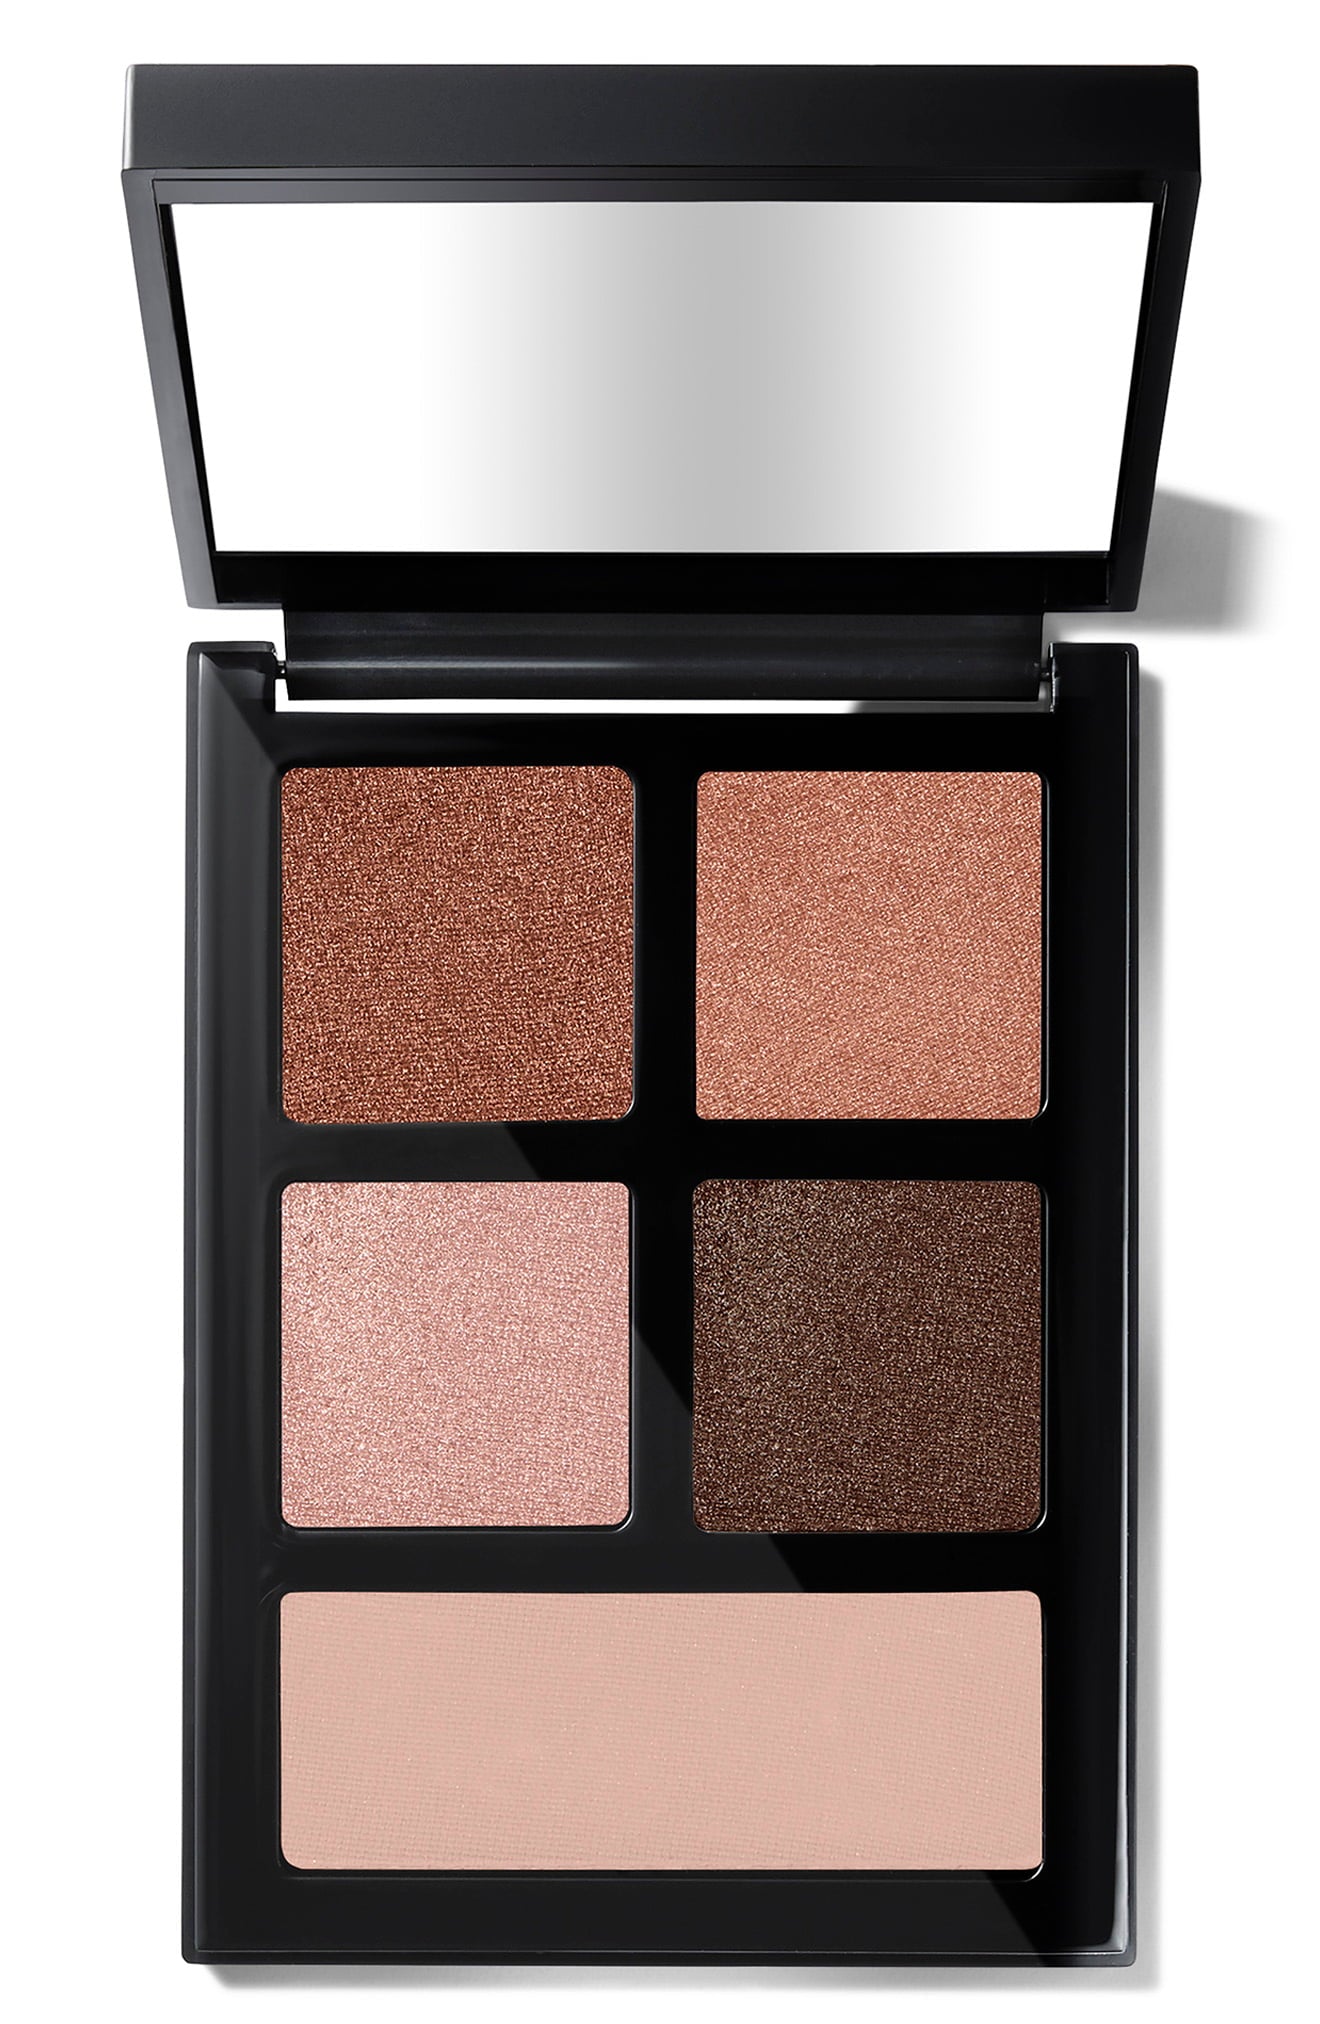 Bobbi Brown The Essential Multicolor Eye Shadow Palette - Into the Sunset